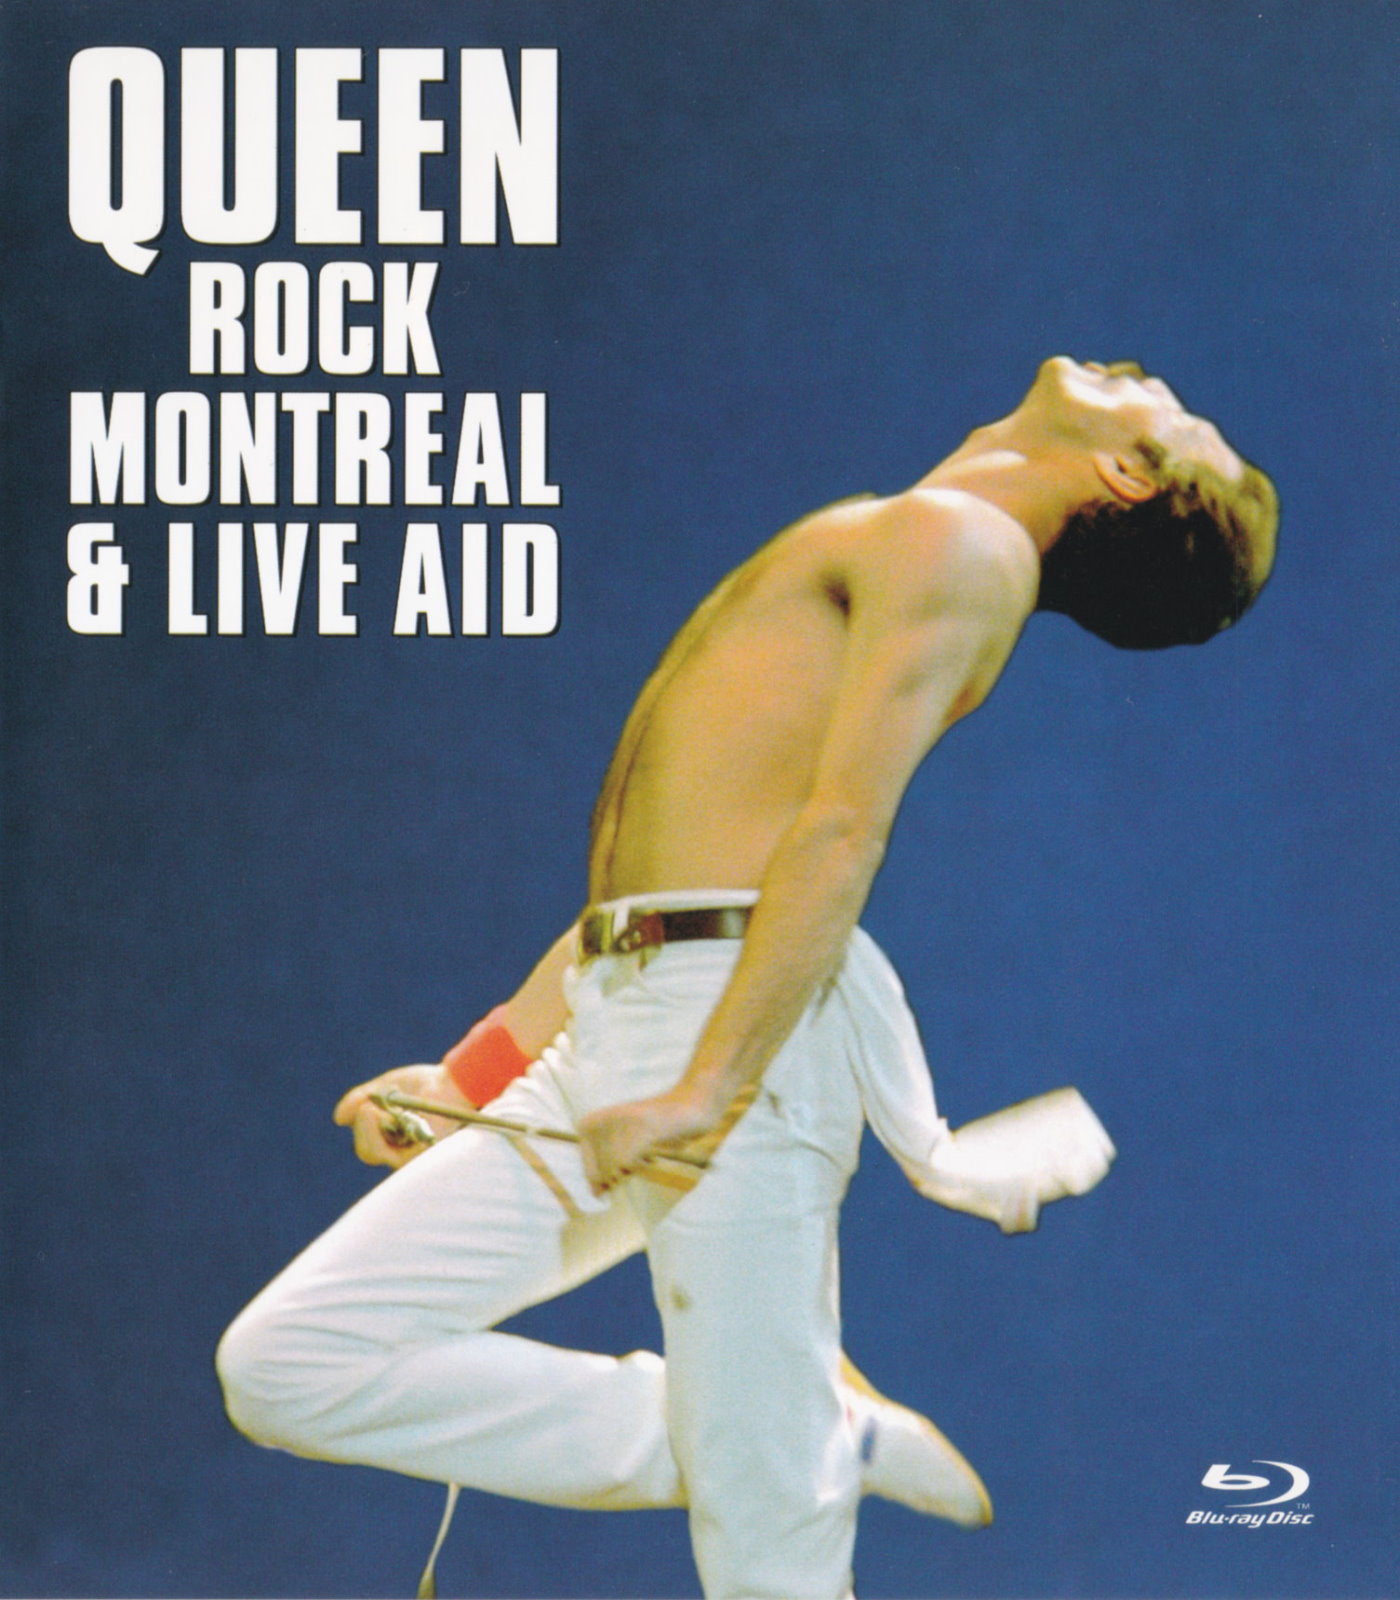 Cover - Queen - Rock Montreal & Live Aid.jpg